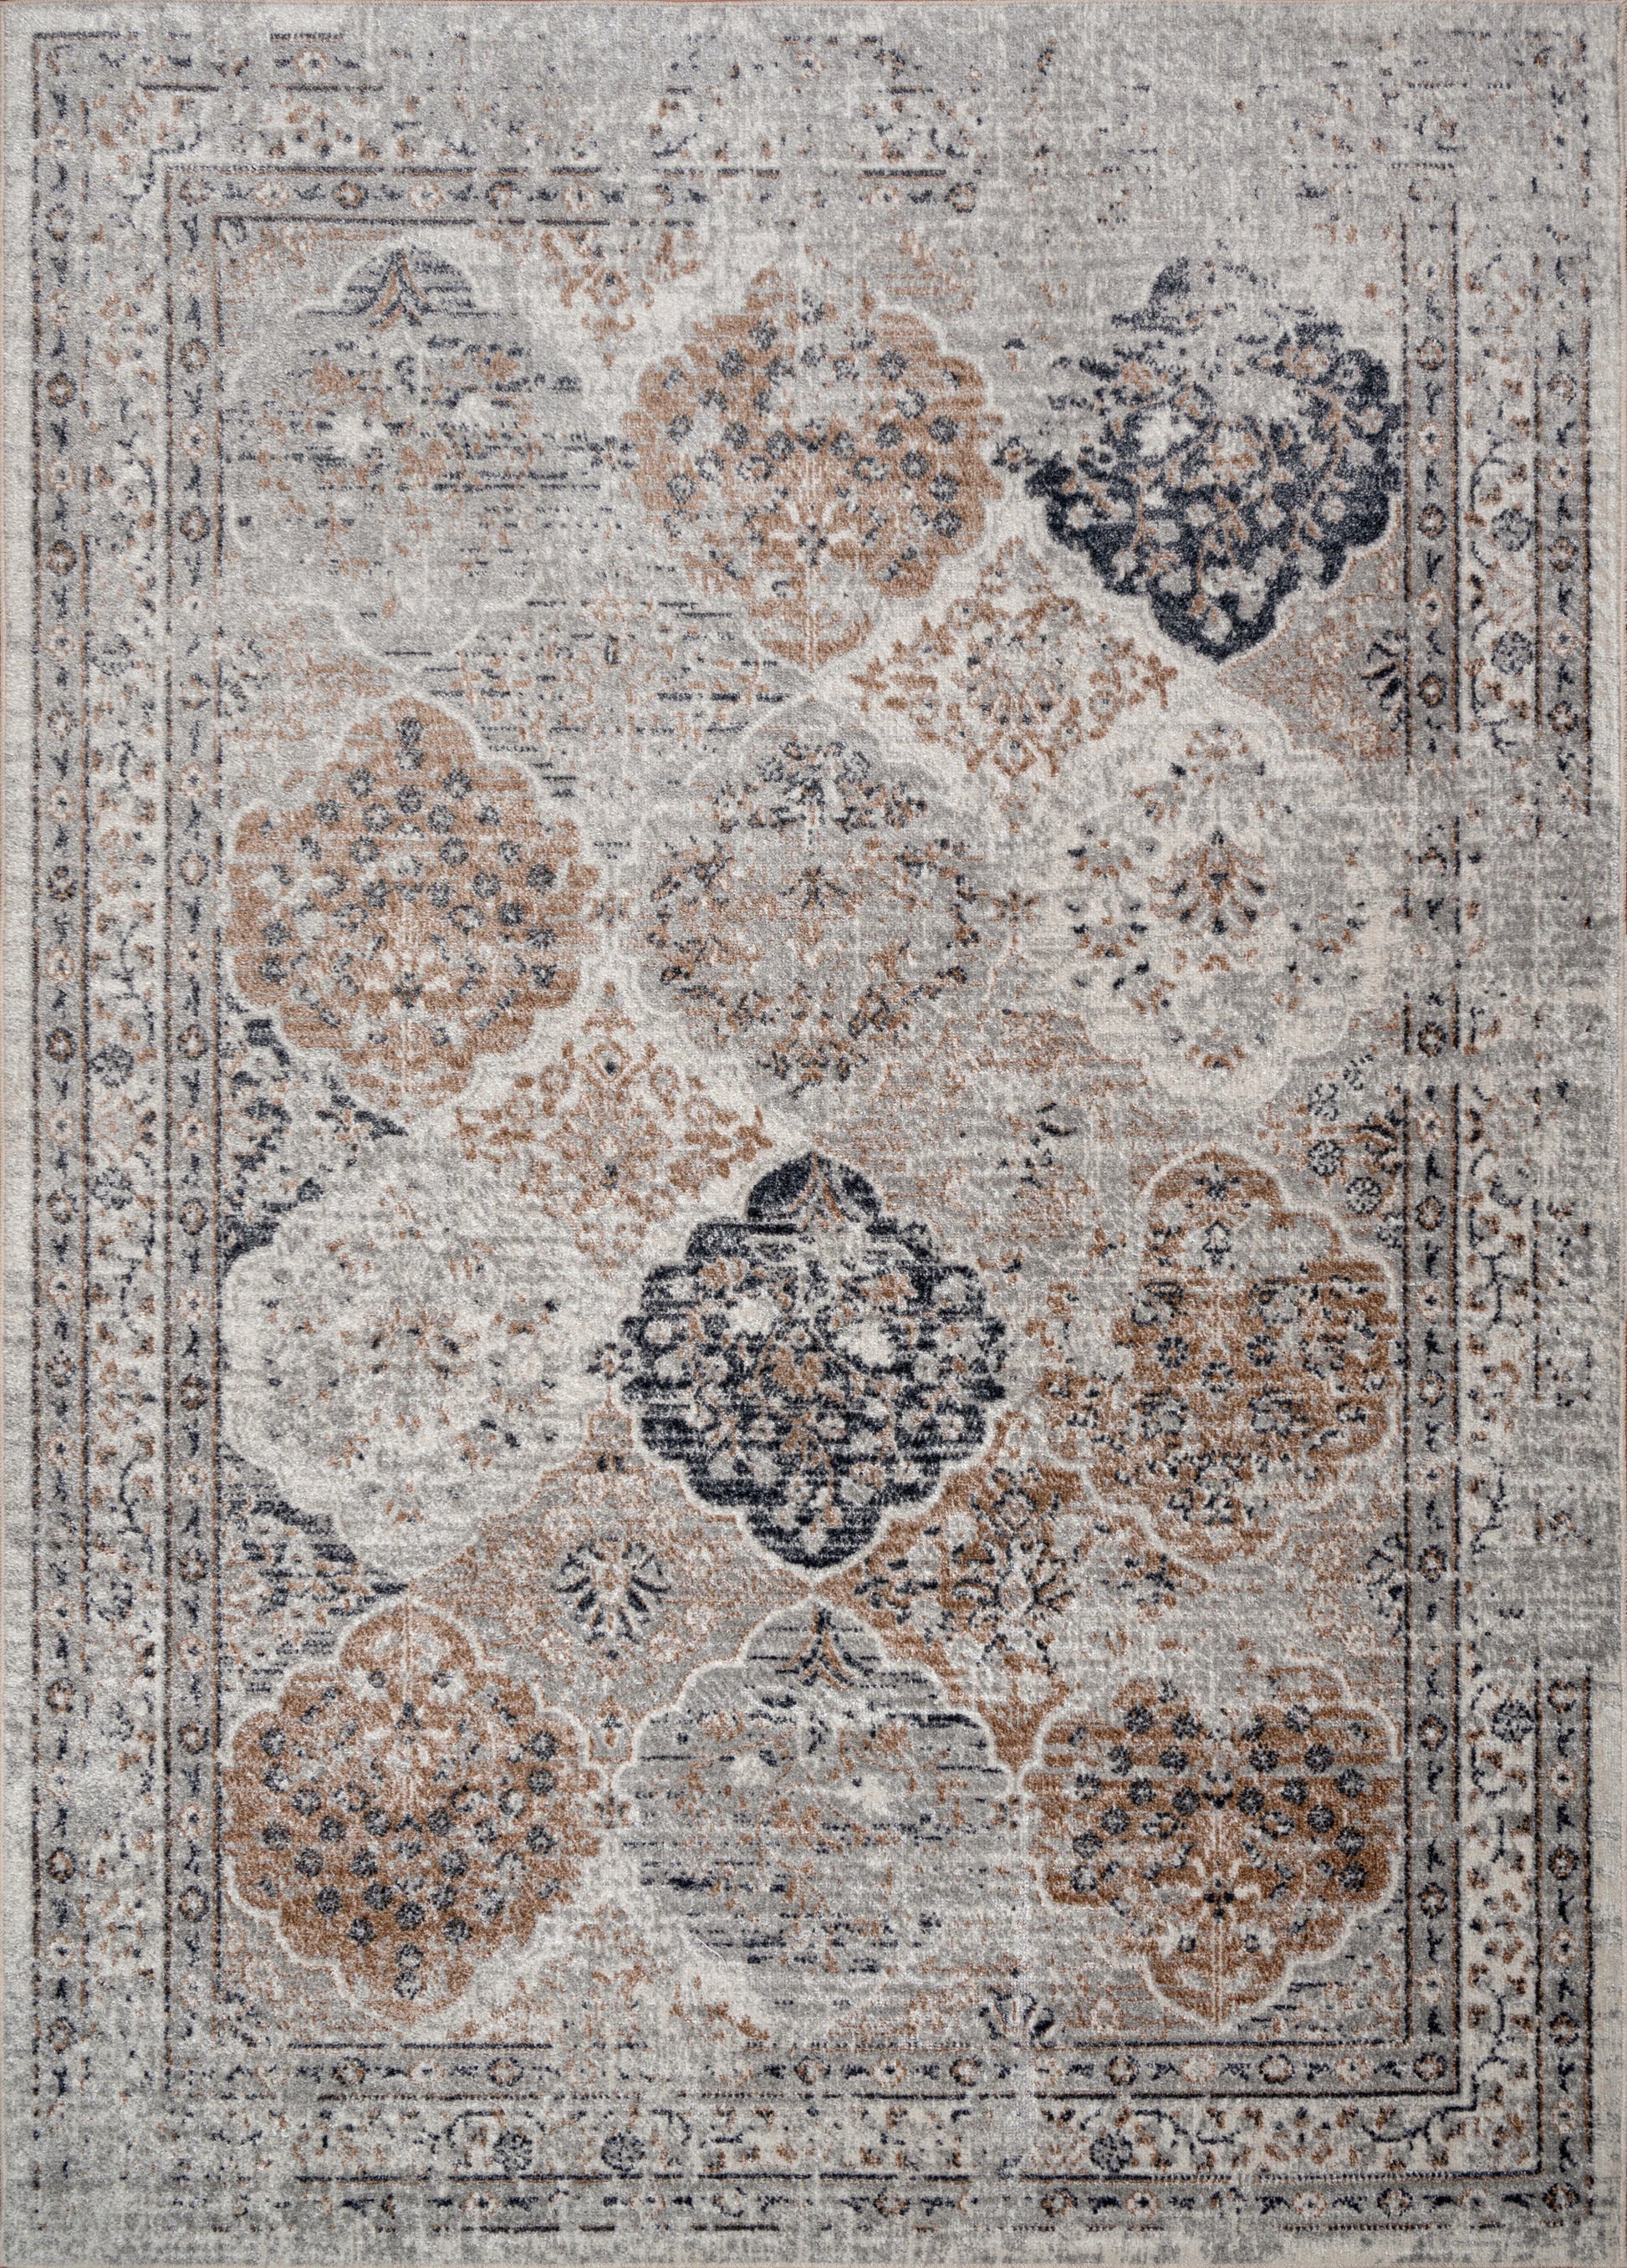 blue ivory brown machine washable boho traditional area rug for living room bedroom 2x5, 3x5 Runner Rug, Entry Way, Entrance, Balcony, Bedside, Home Office, Table Top